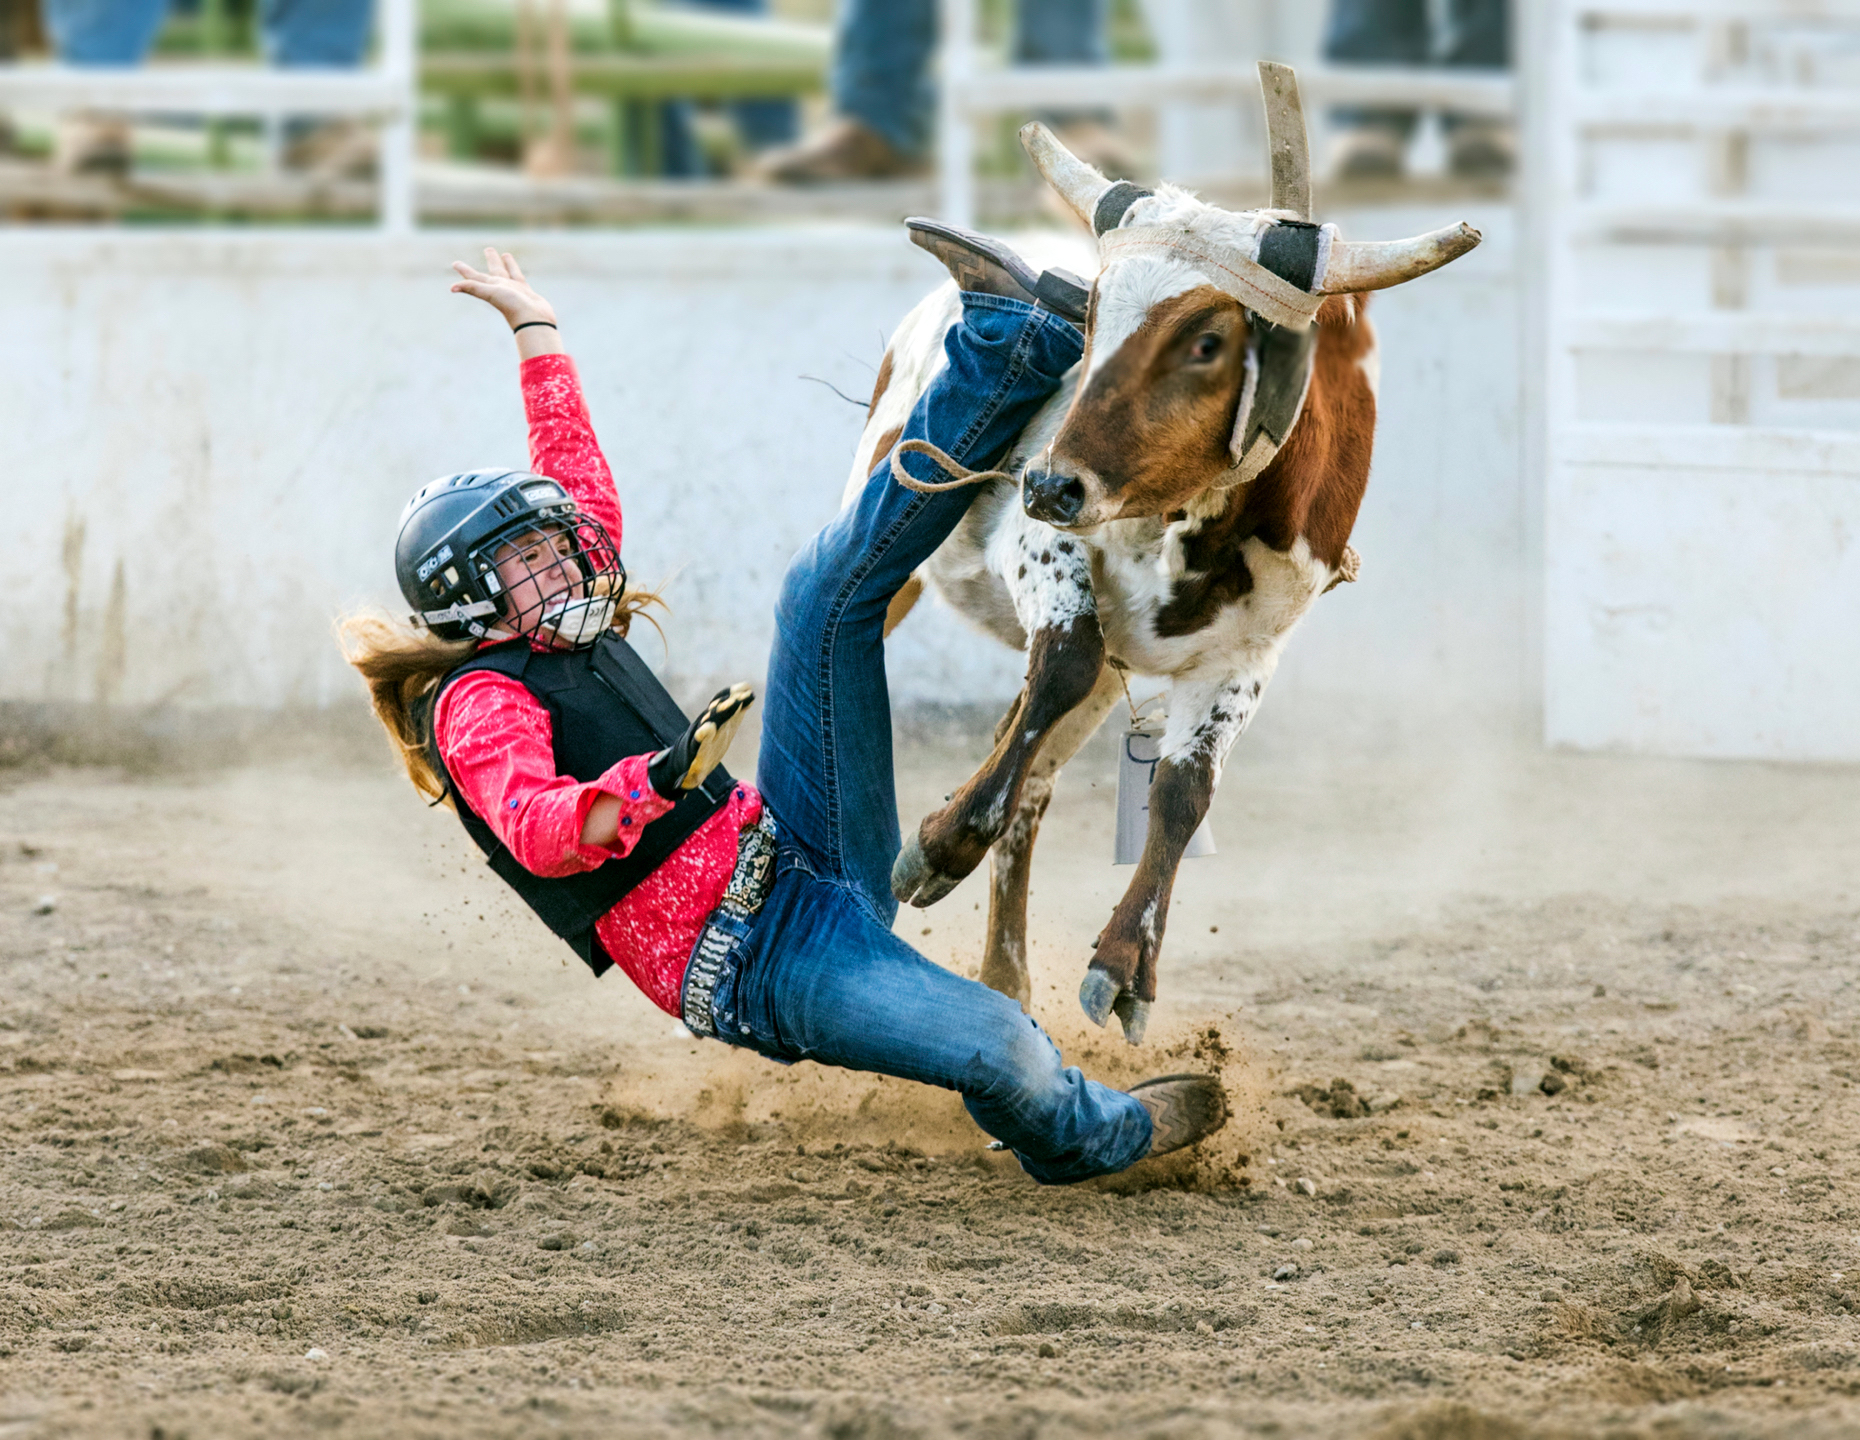 Young cowgirl riding a small bull in the Junior Steer Riding competition, Chaffee County Fair & Rodeo, Salida, Colorado, USA